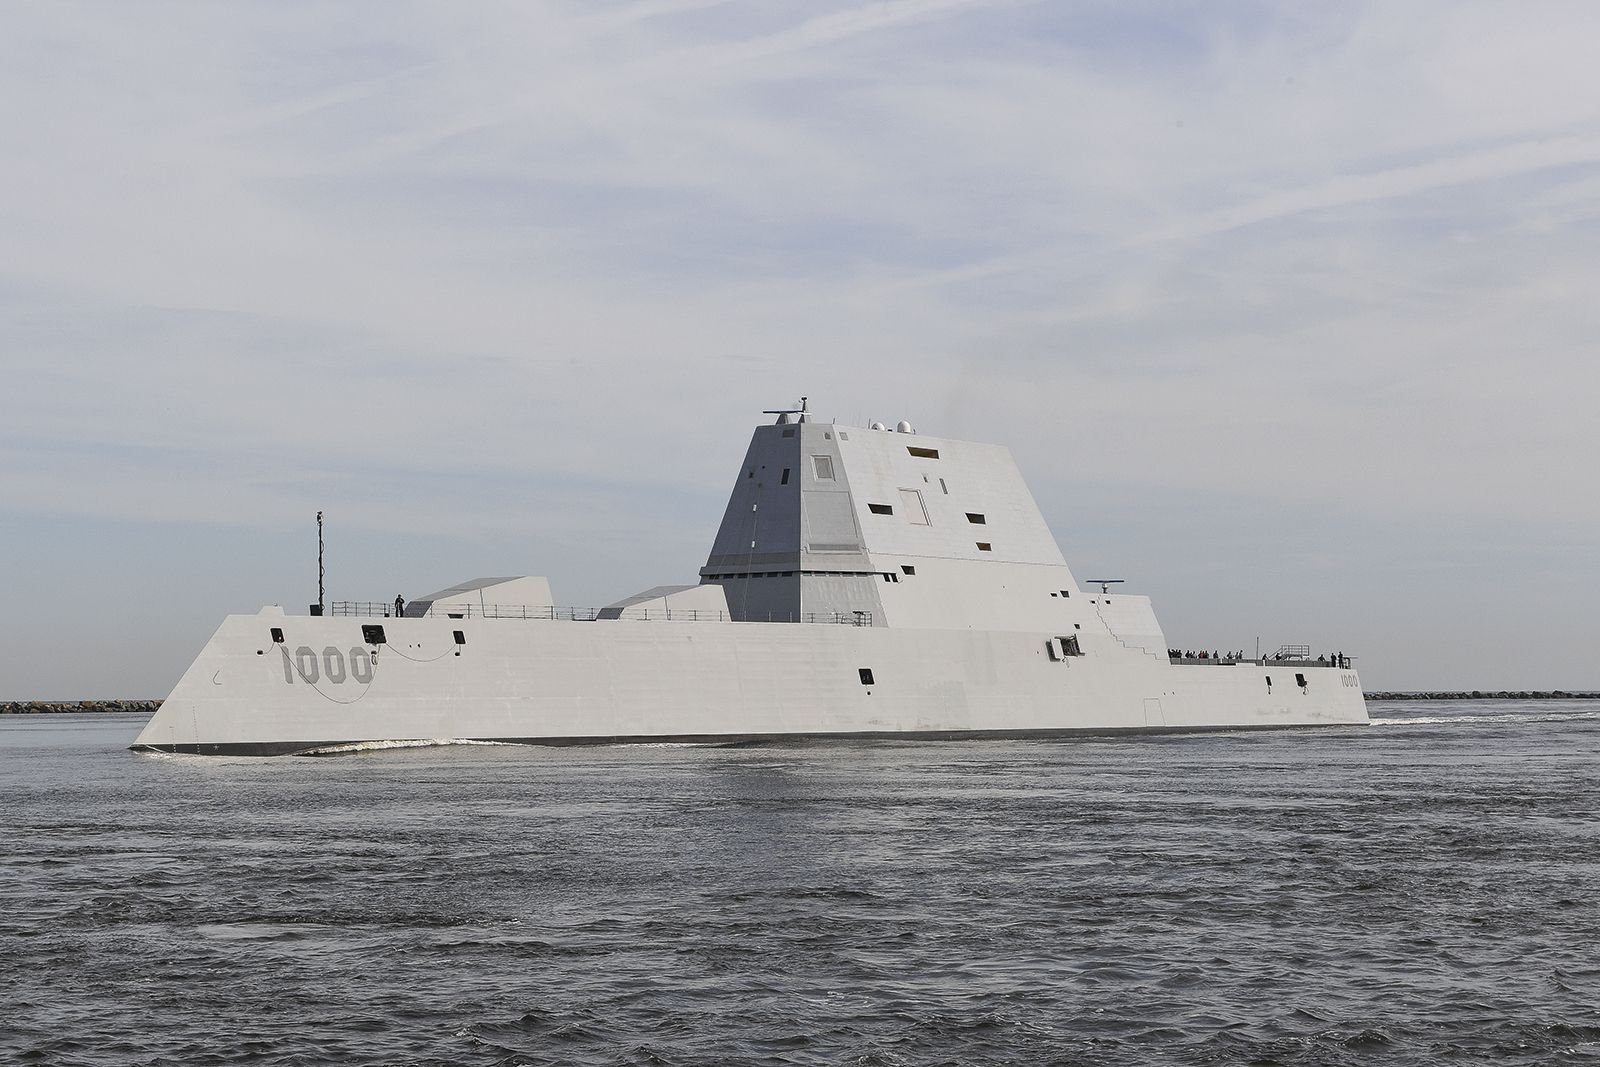 After Only 3 Years in Service, the USS Zumwalt's Mission Is Changing